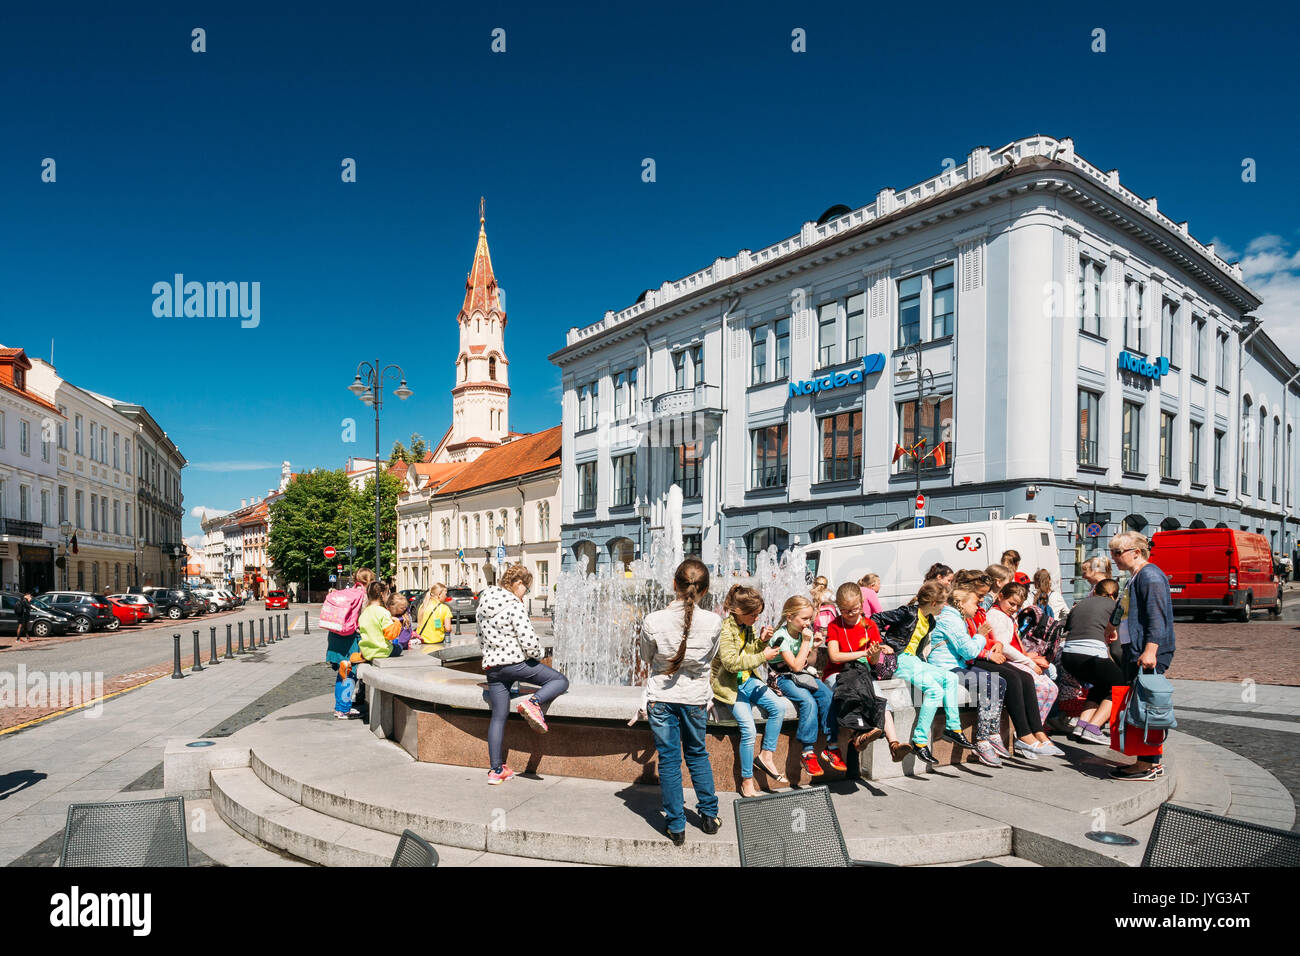 Vilnius, Lithuania - July 5, 2016: Children Resting Near Town Hall Square Fountain In Rotuses Square In Old Town. St. Nicholas Church In Sunny Summer  Stock Photo